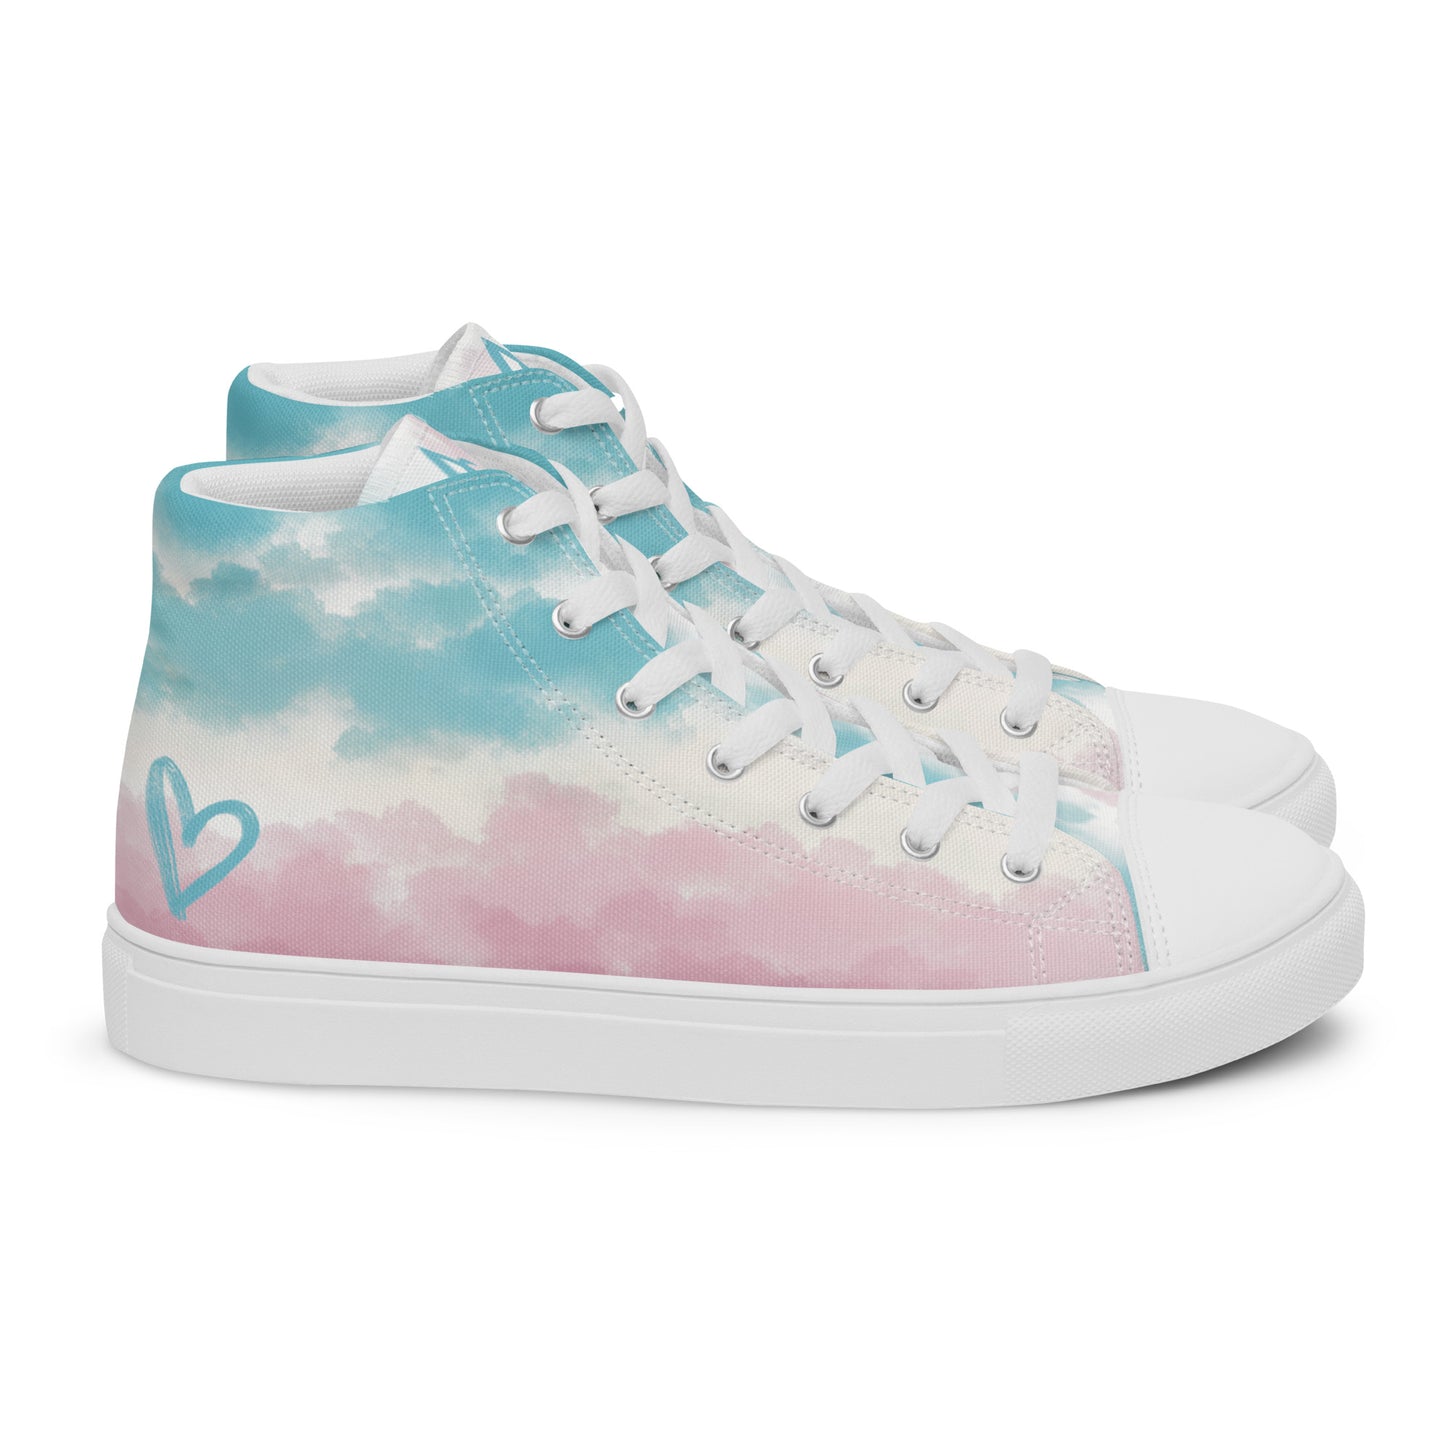 Right view: High top shoes with a cloudy design in blue, white, and pink has a doodle style heart on the heel, white shoe laces, and white details.